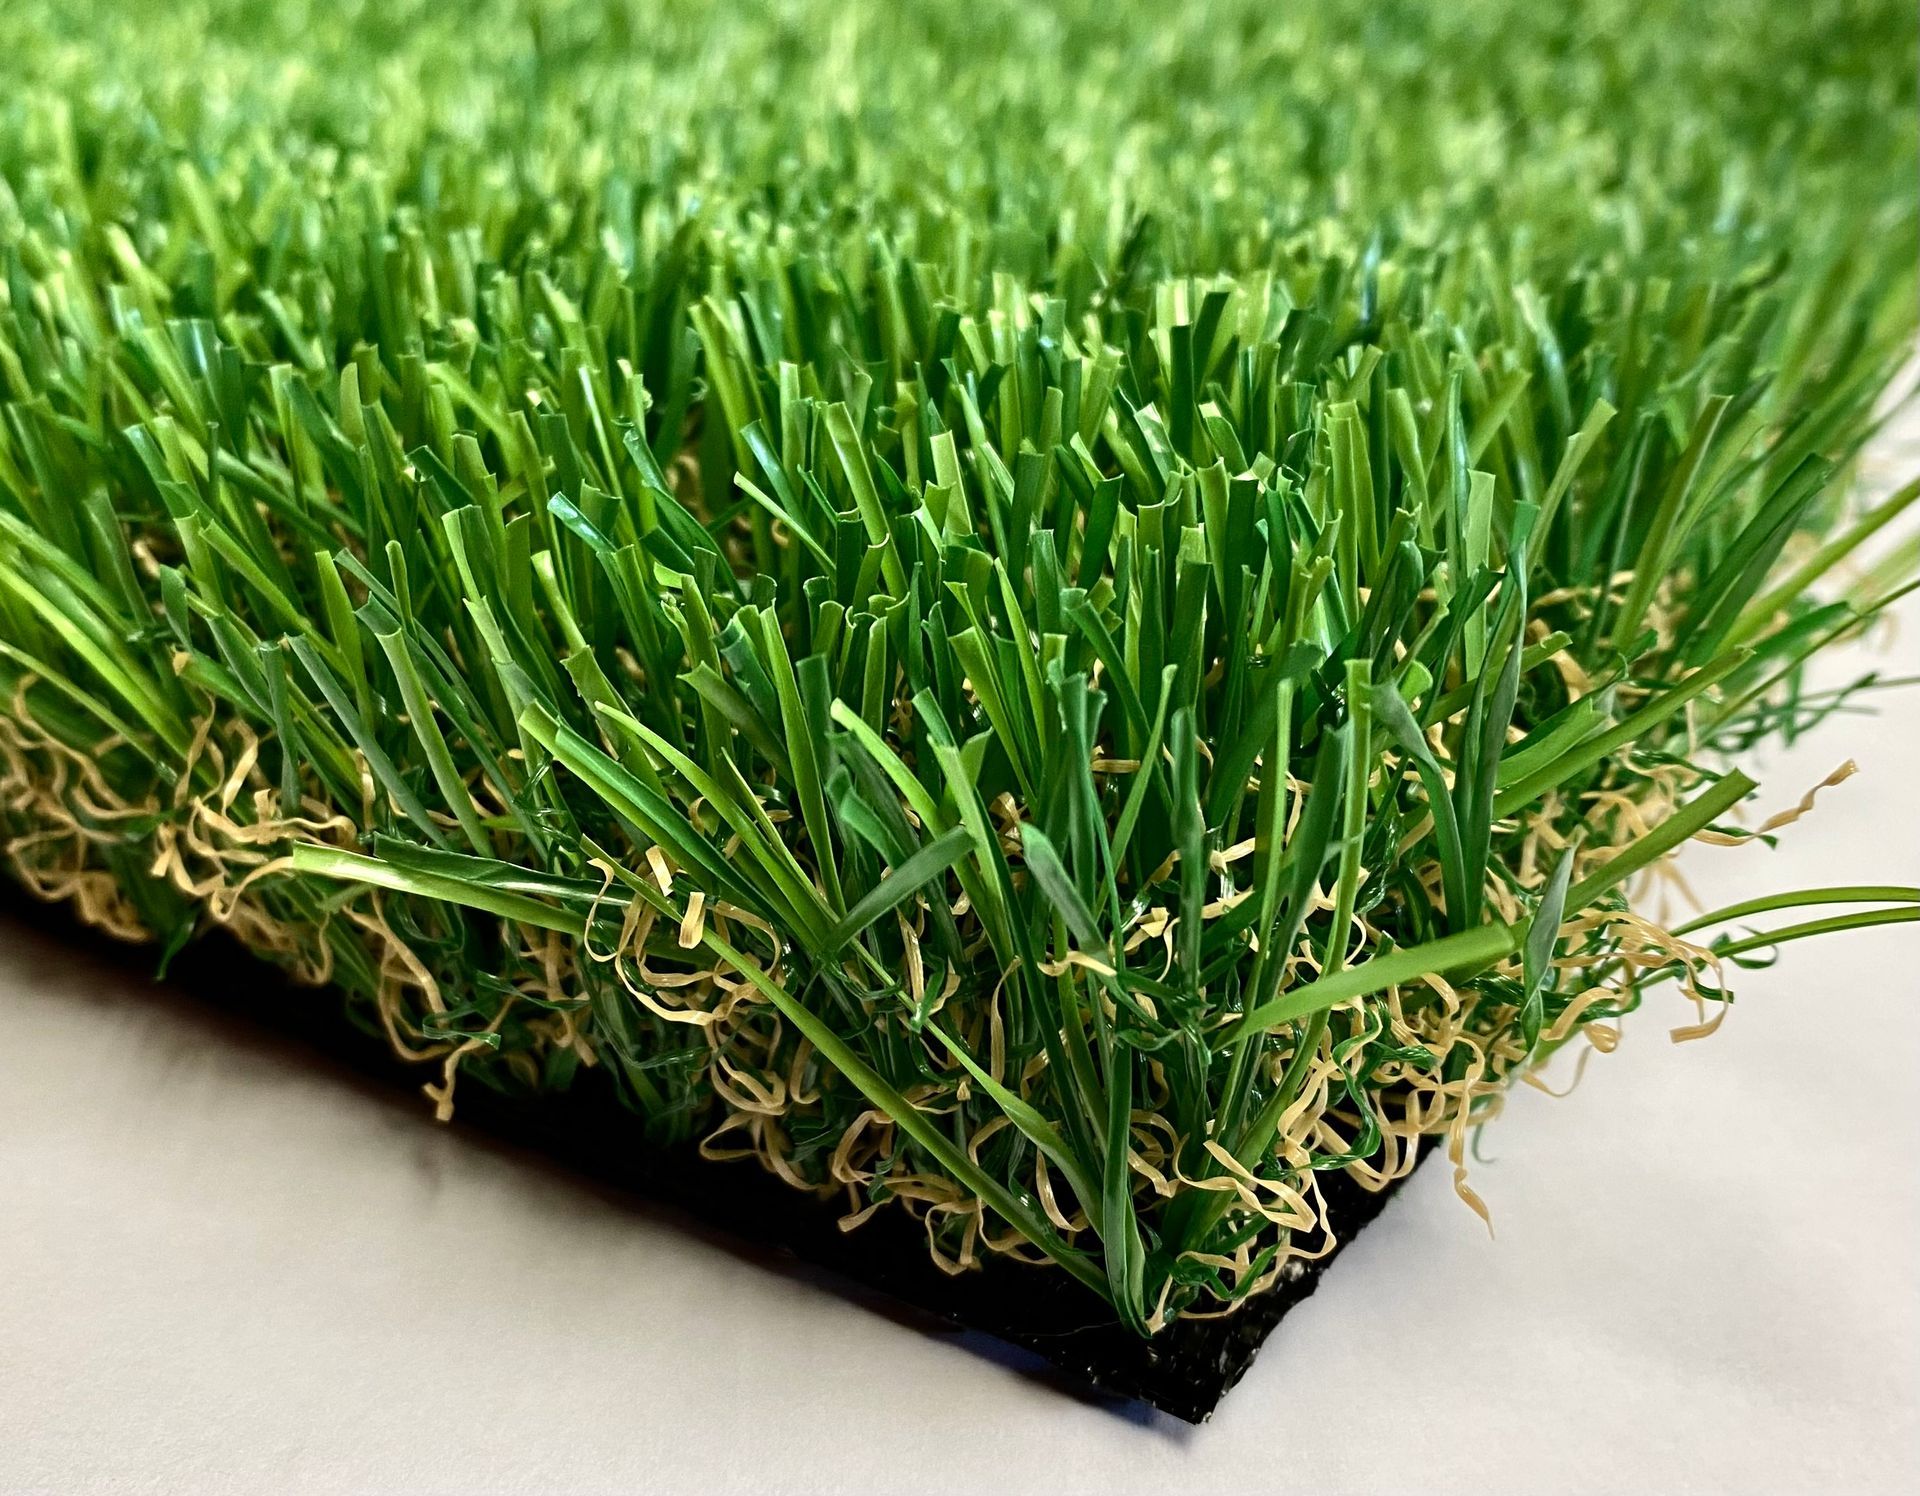 S-90 — Synthetic Turf in South San Francisco, CA